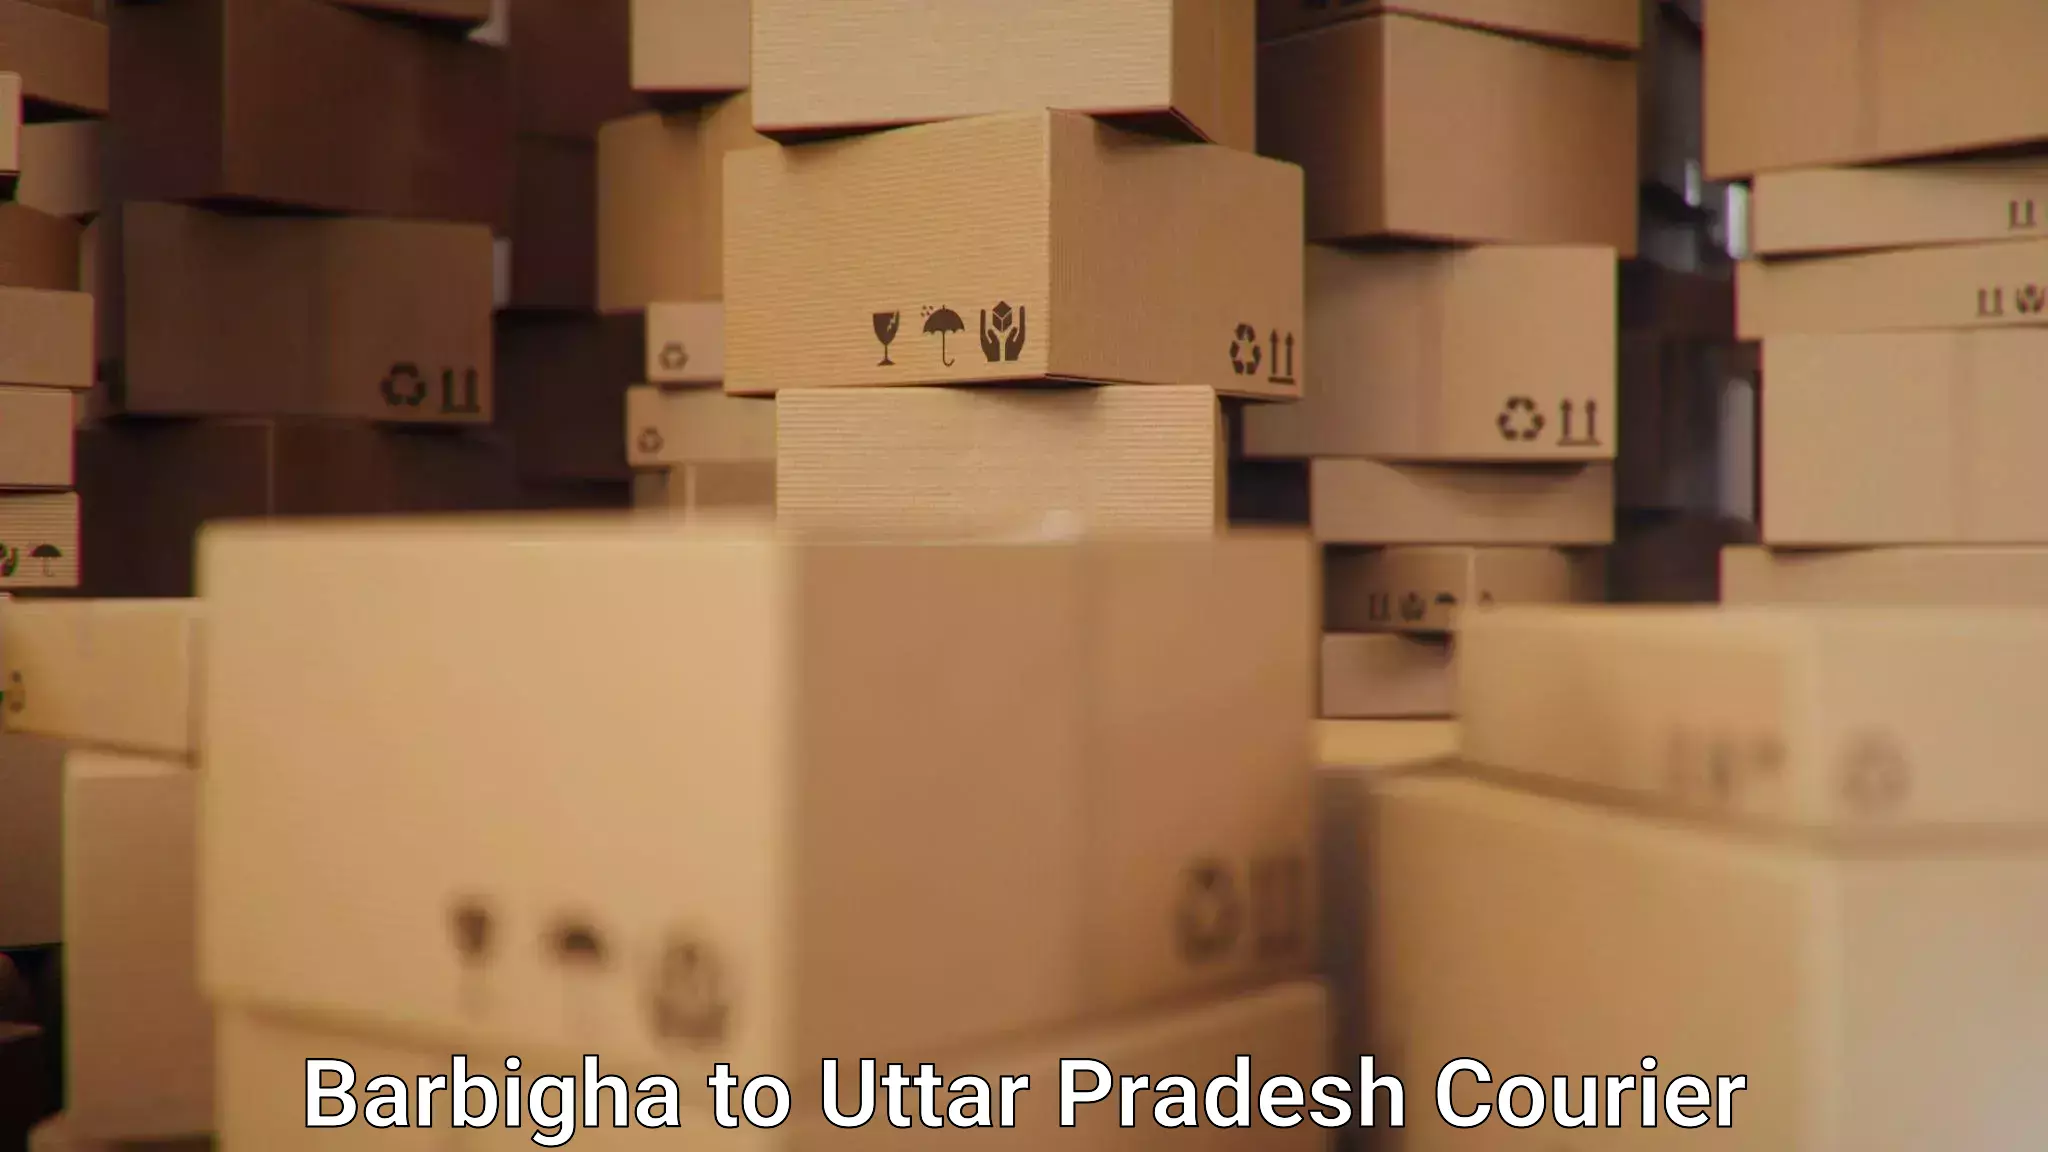 Package tracking Barbigha to Agra